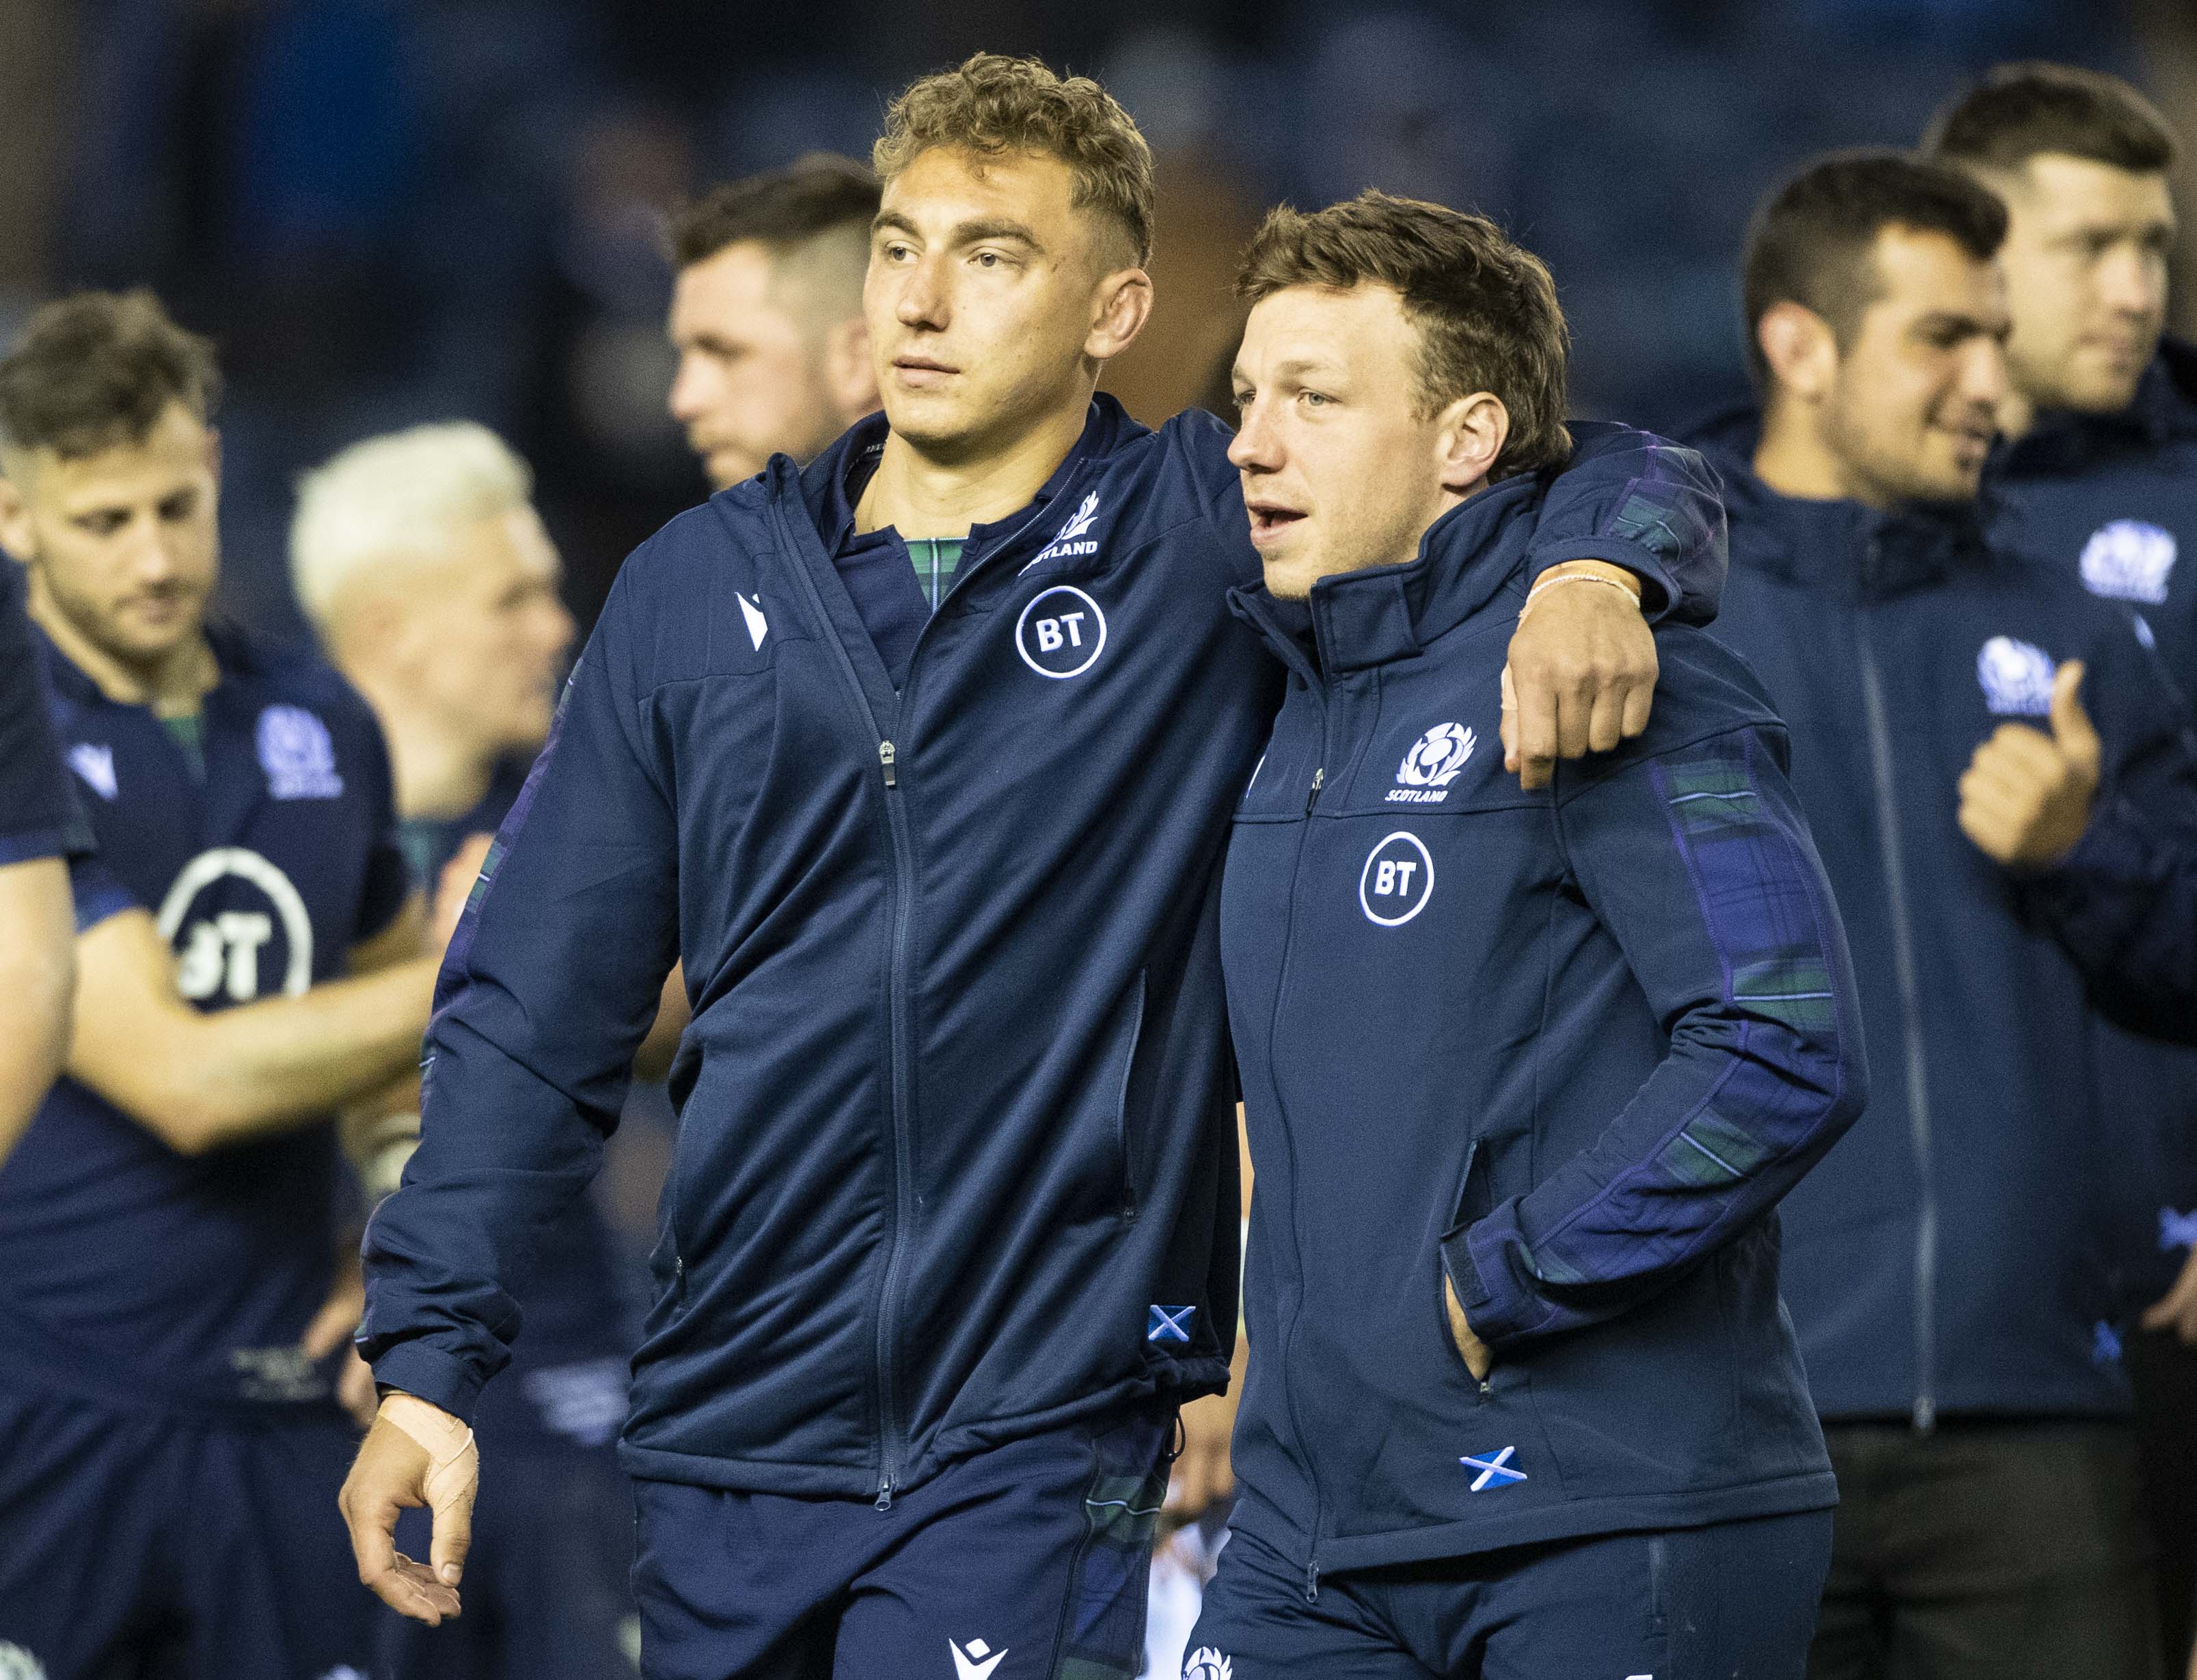 Jamie Ritchie will likely replace the injured Hamish Watson in the Scotland team against Samoa.